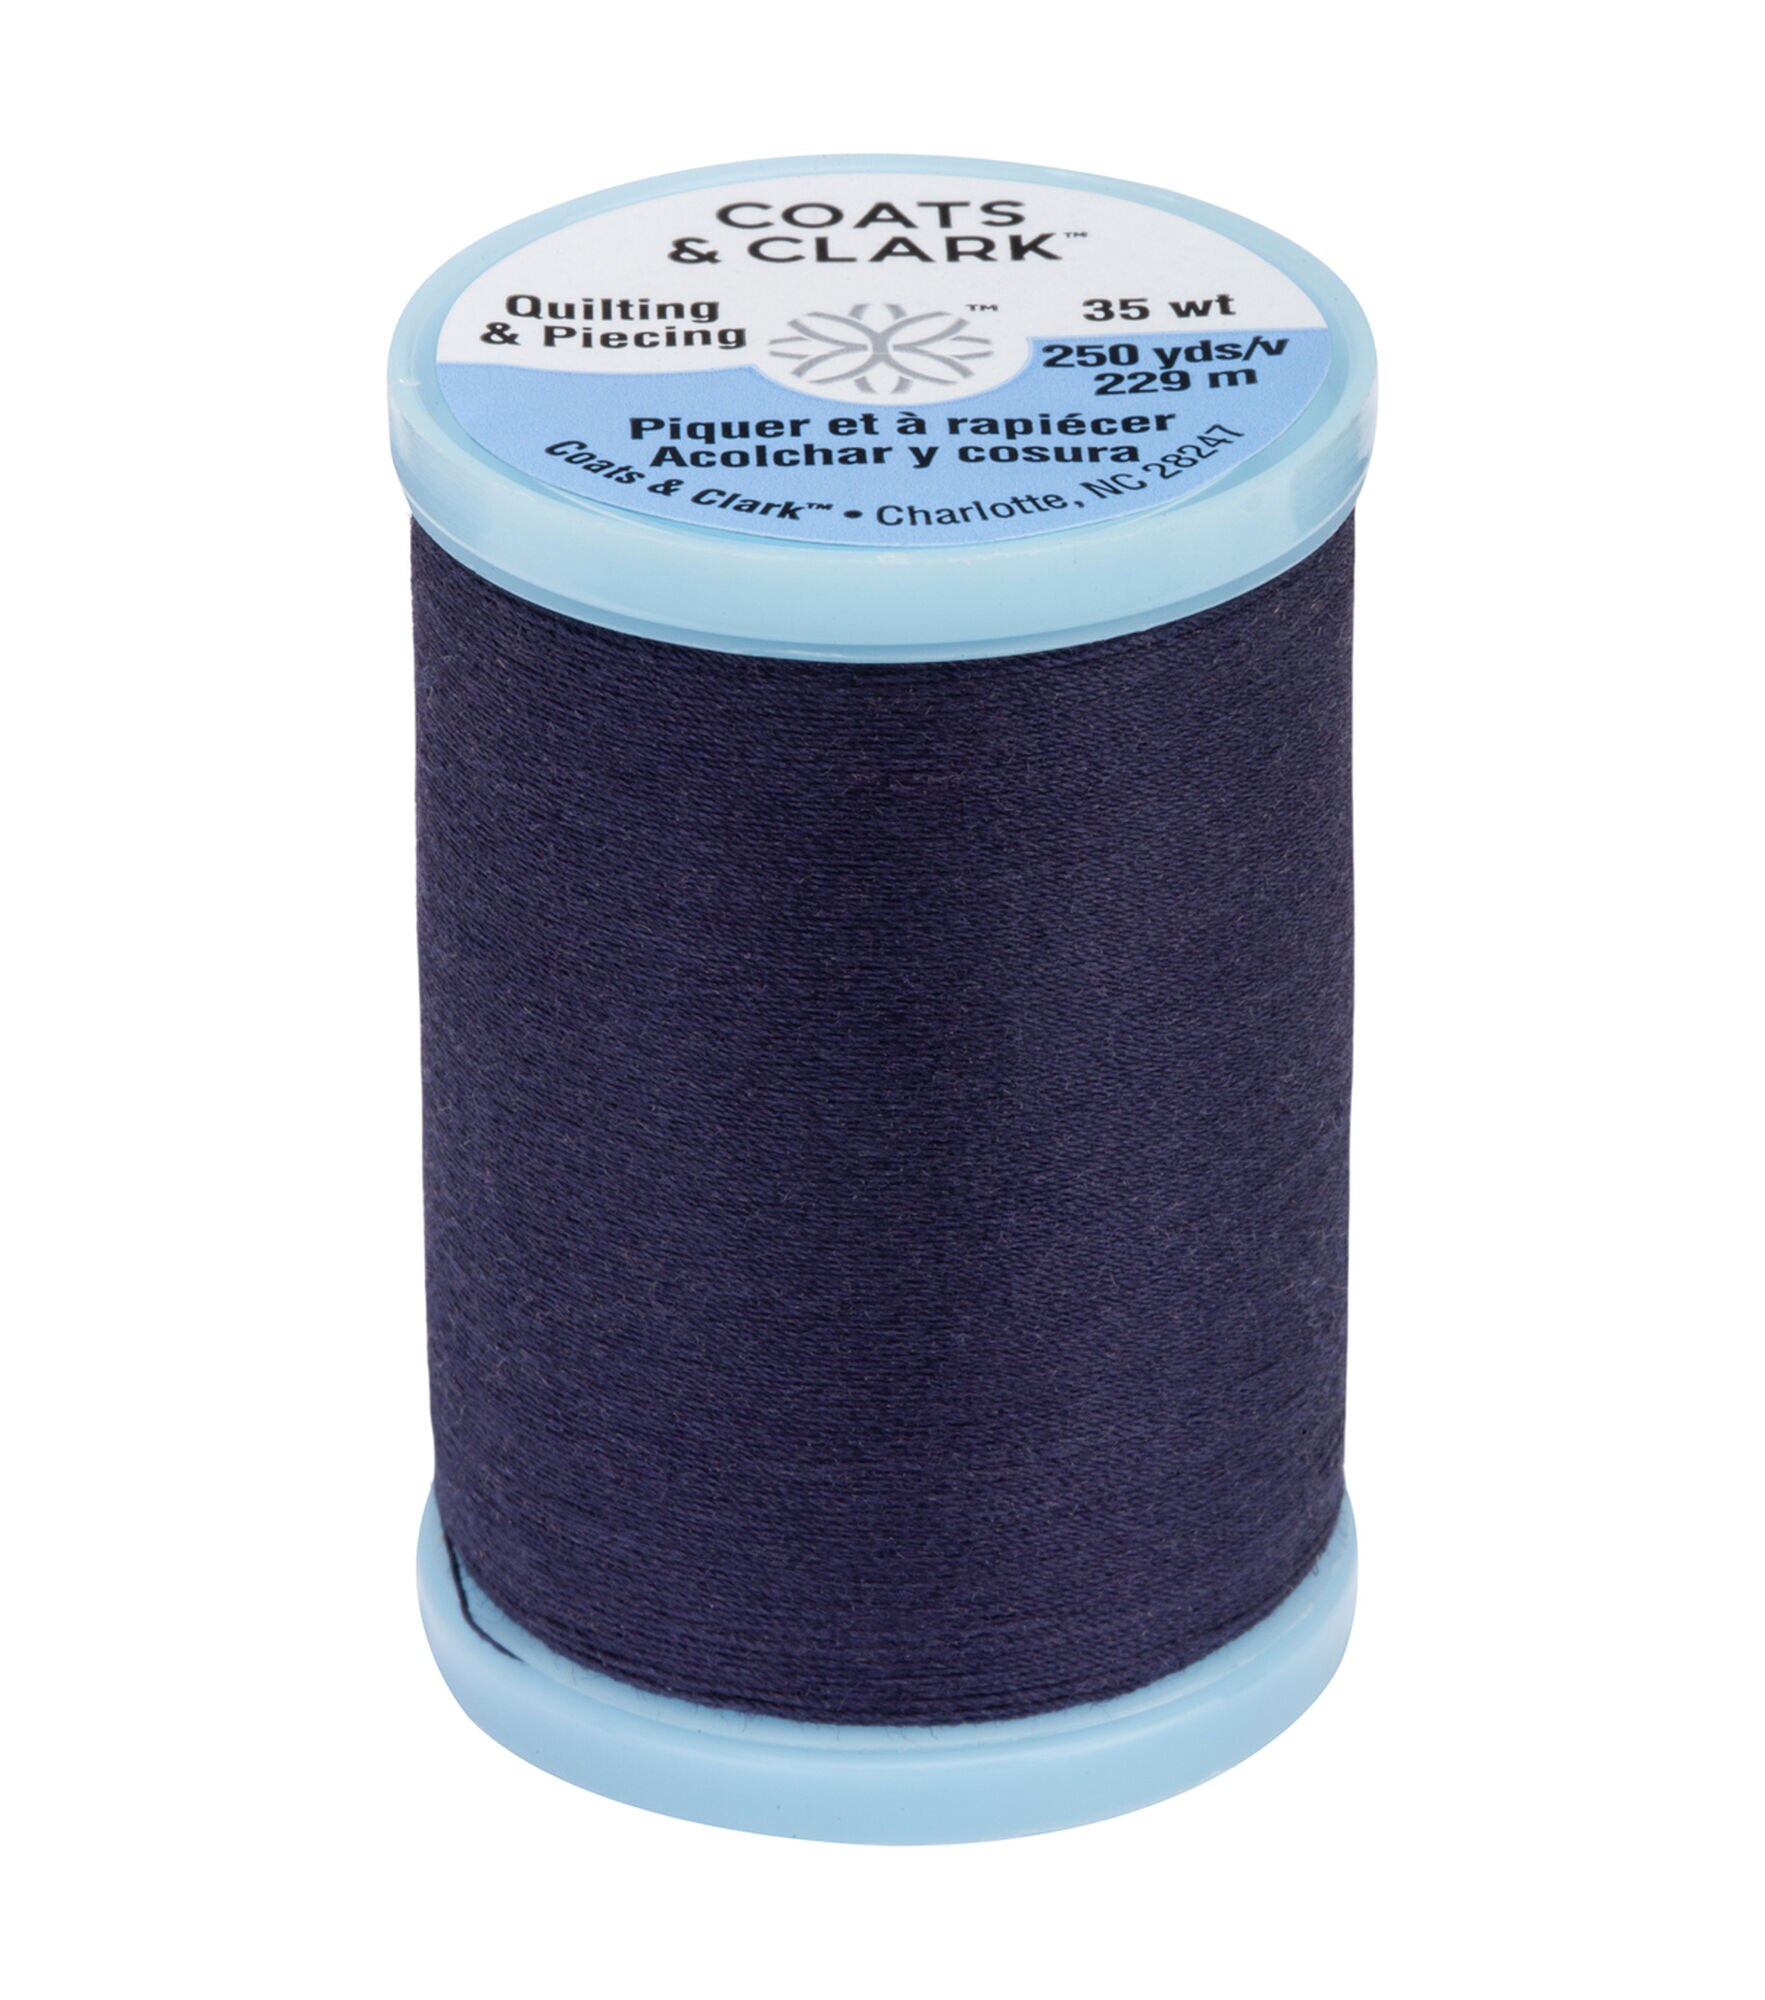 Coats & Clark 250yd 35wt Covered Quilting & Piecing Cotton Thread, 4900 Navy, hi-res